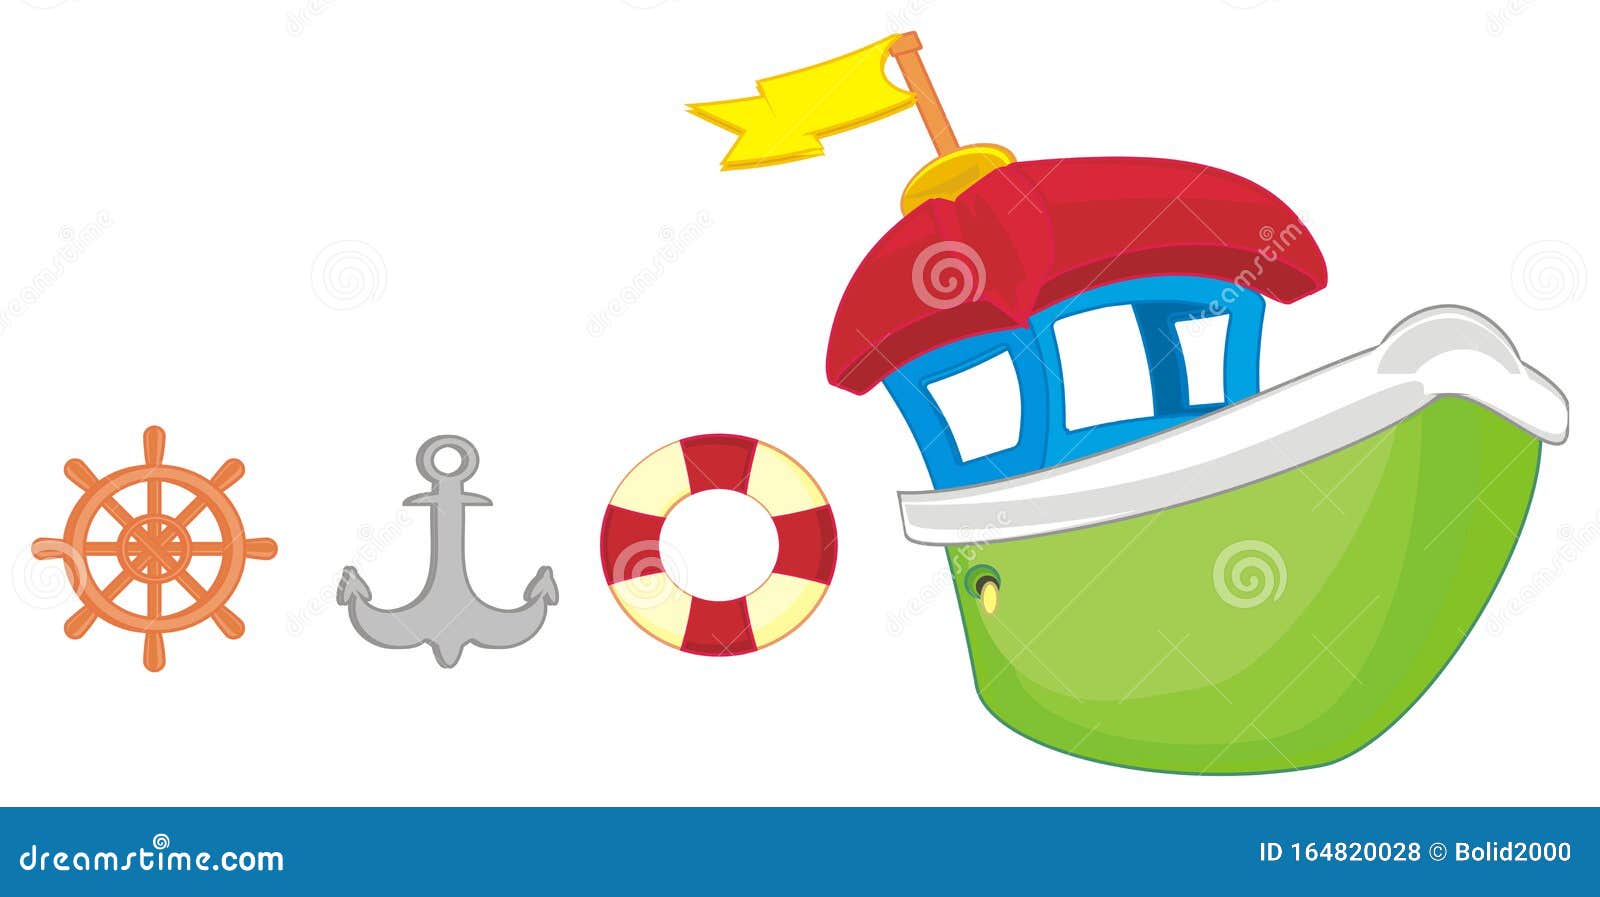 Boat and tools stock illustration. Illustration of buoy - 164820028